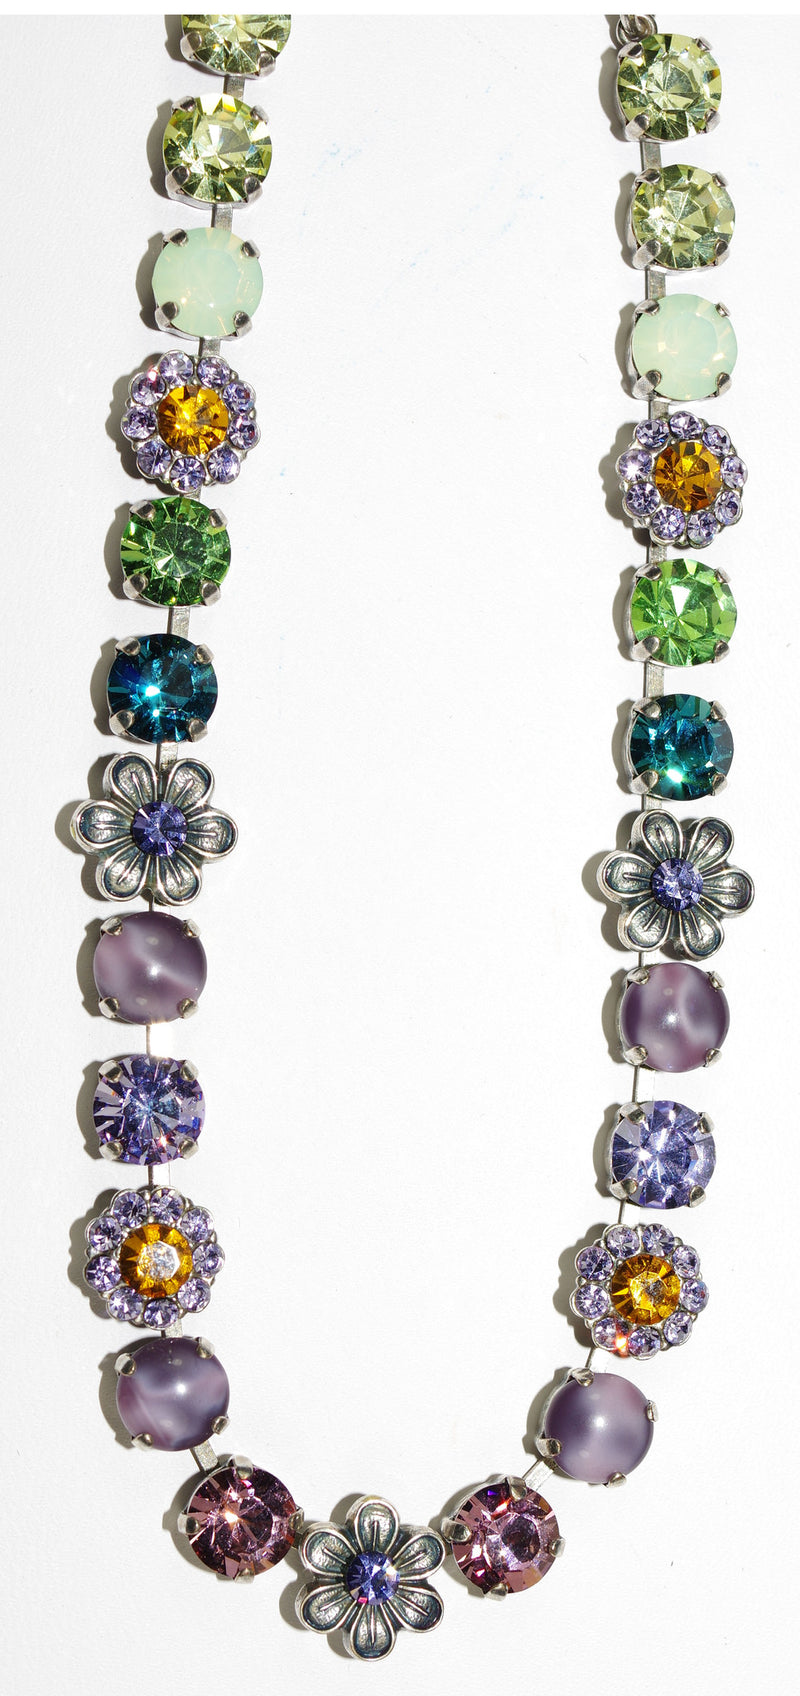 MARIANA NECKLACE LILAC: lavender, green, blue, amber, pink stones in silver setting, 18" adjustable chain